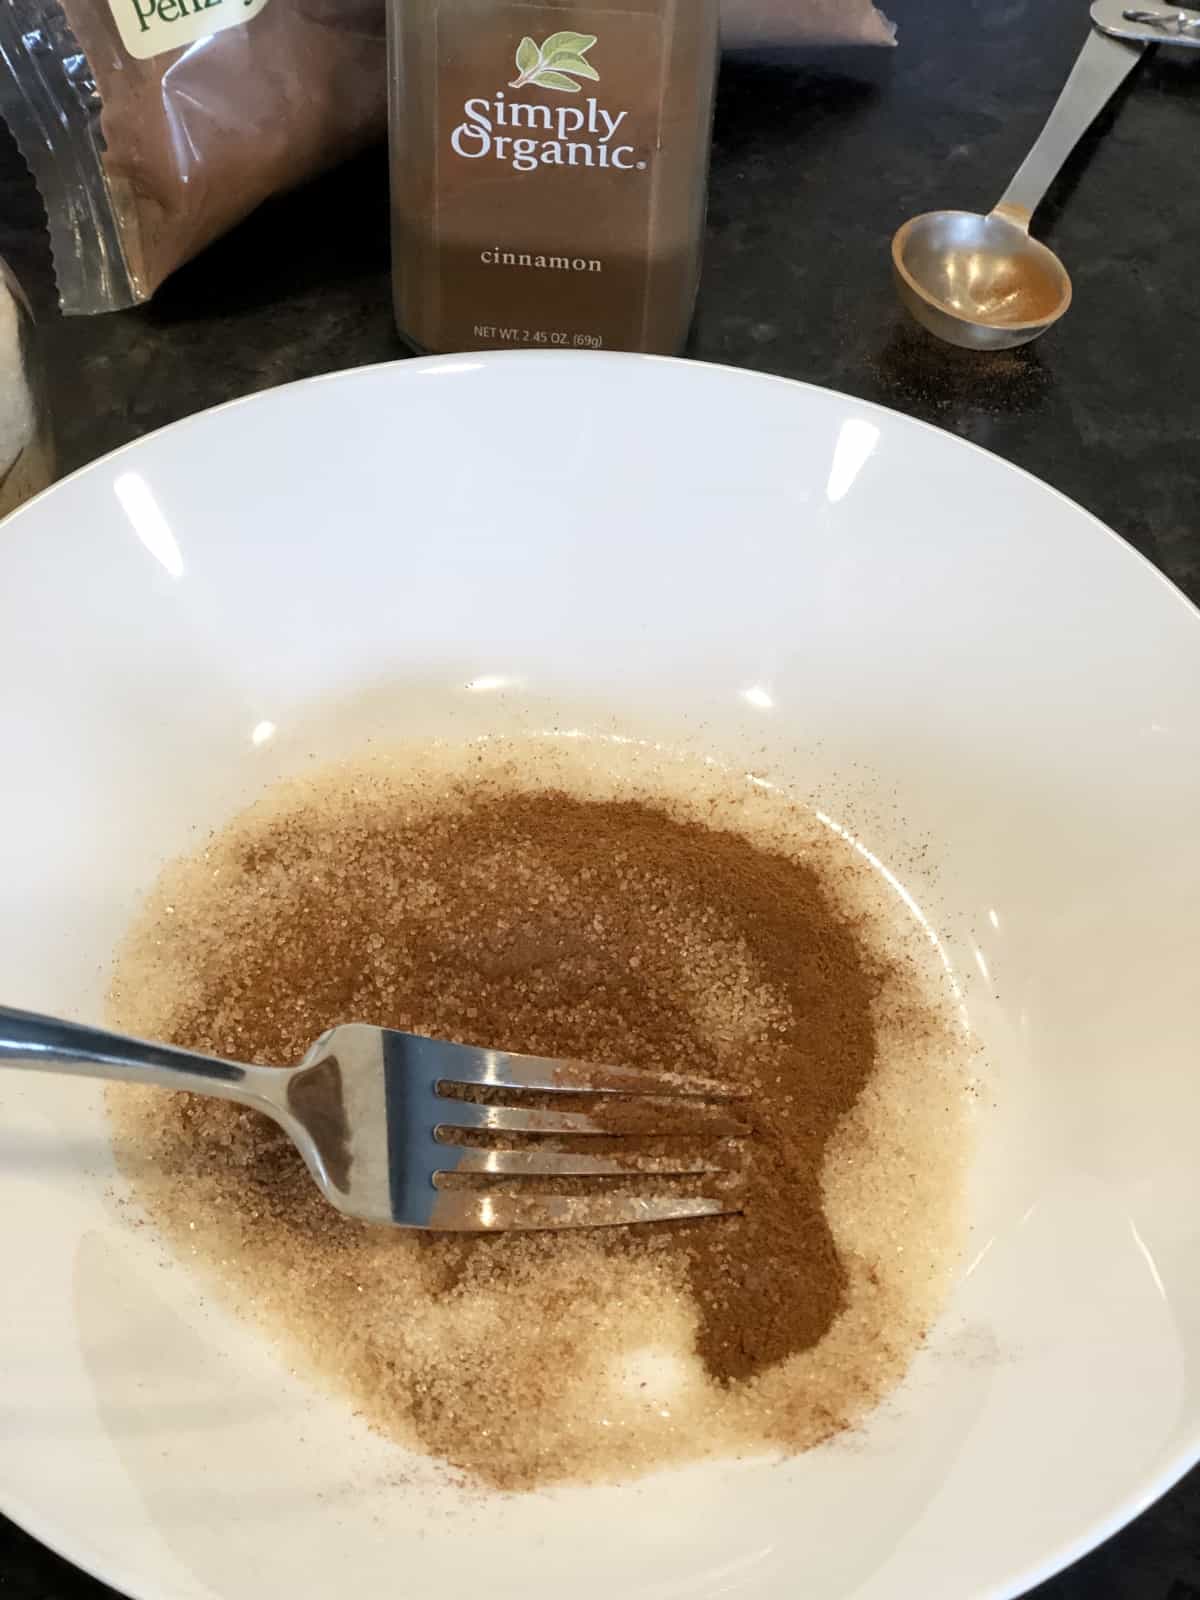 Mixing cinnamon and sugar in shallow white bowl with a fork.